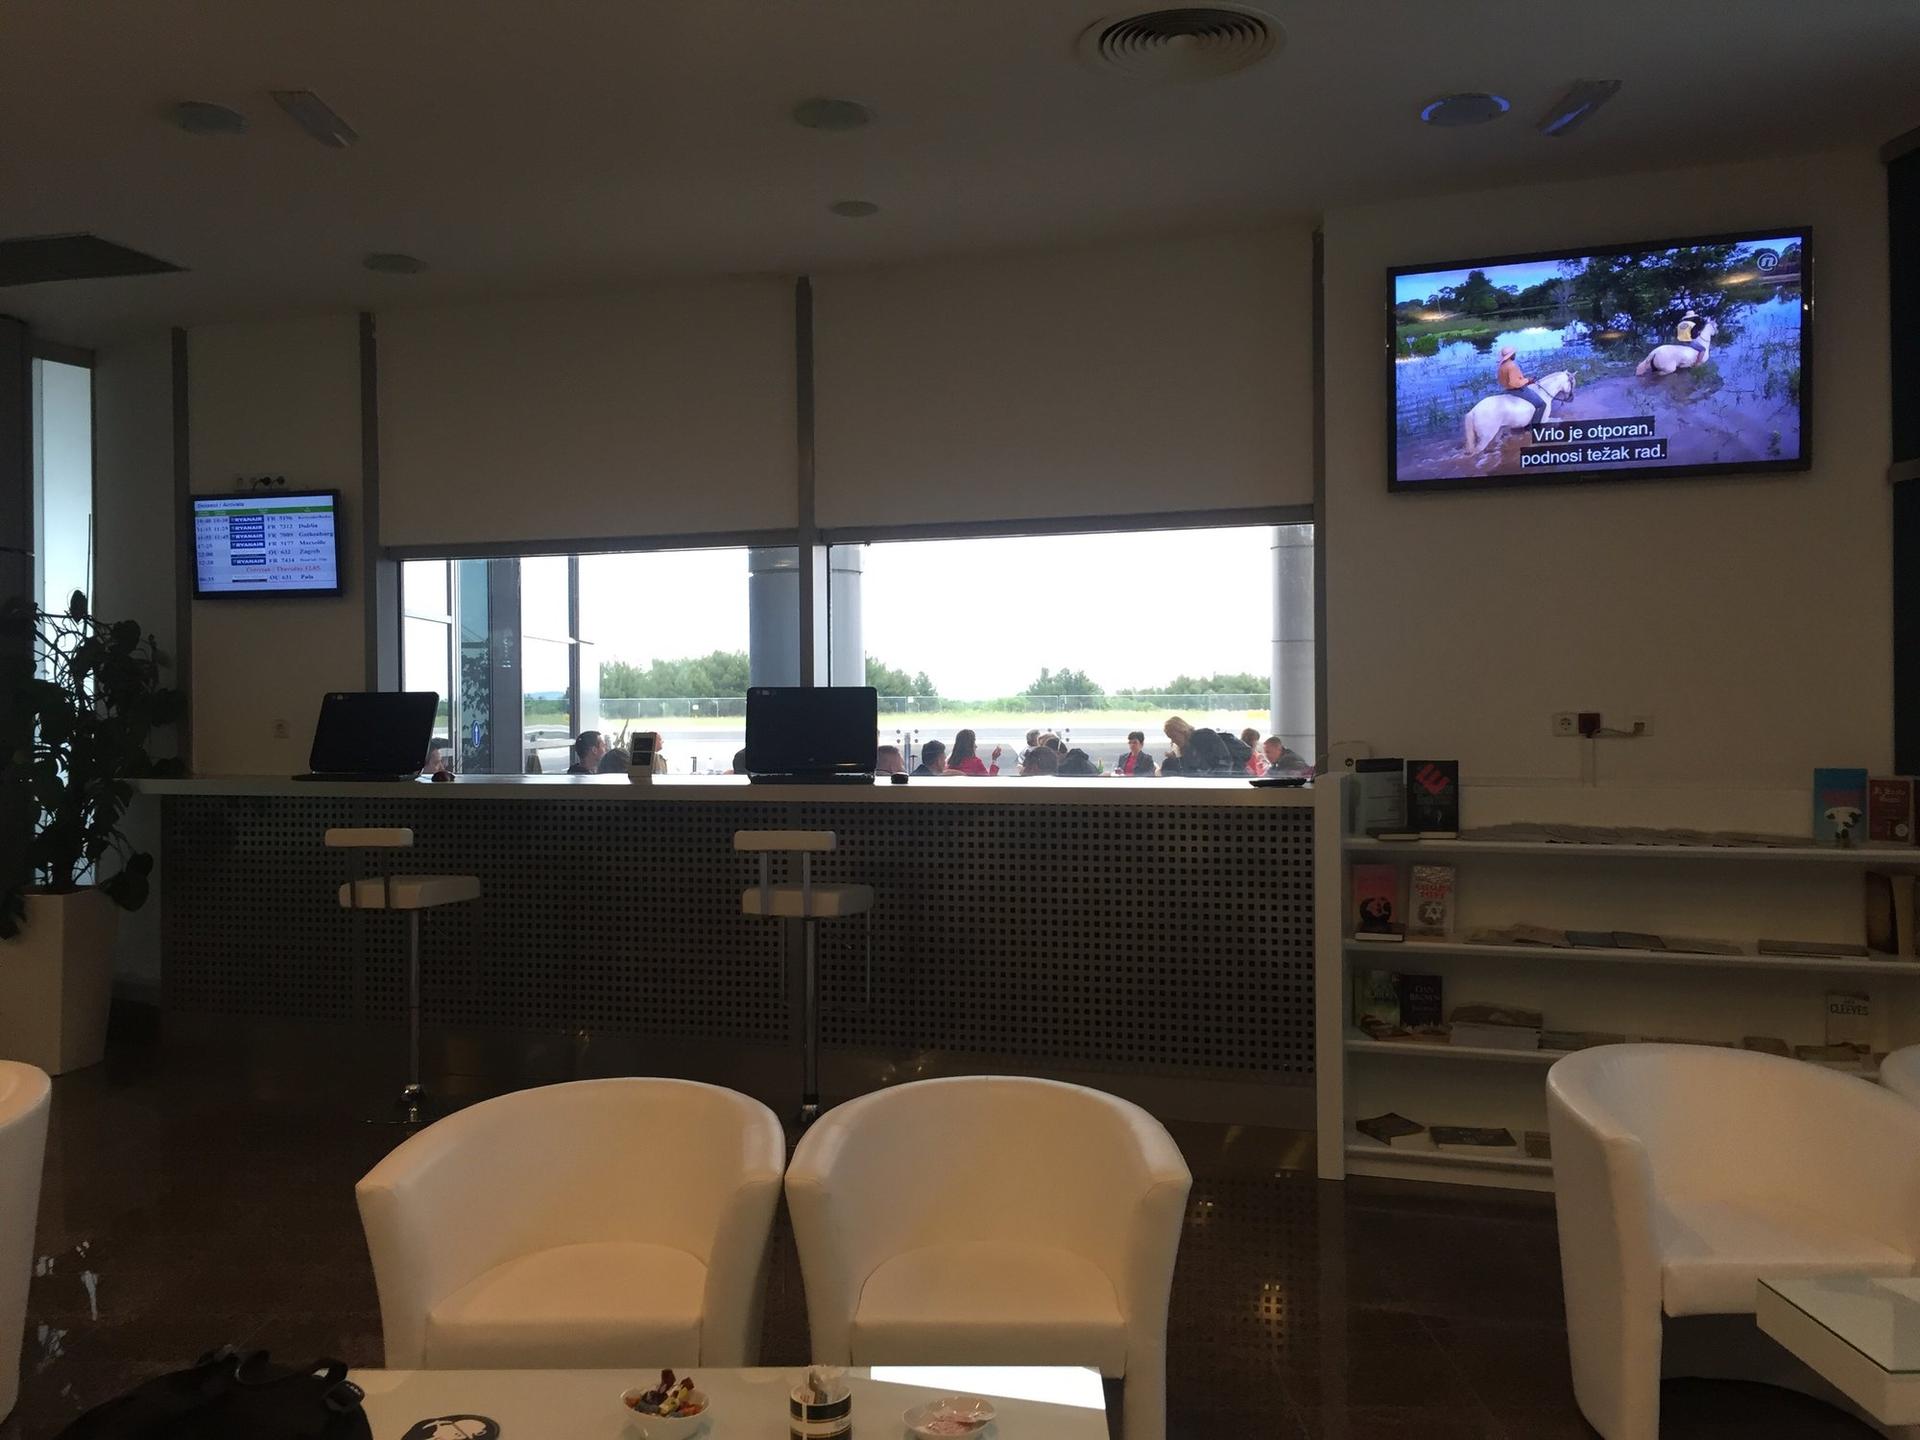 Zadar Airport Business Lounge image 1 of 11